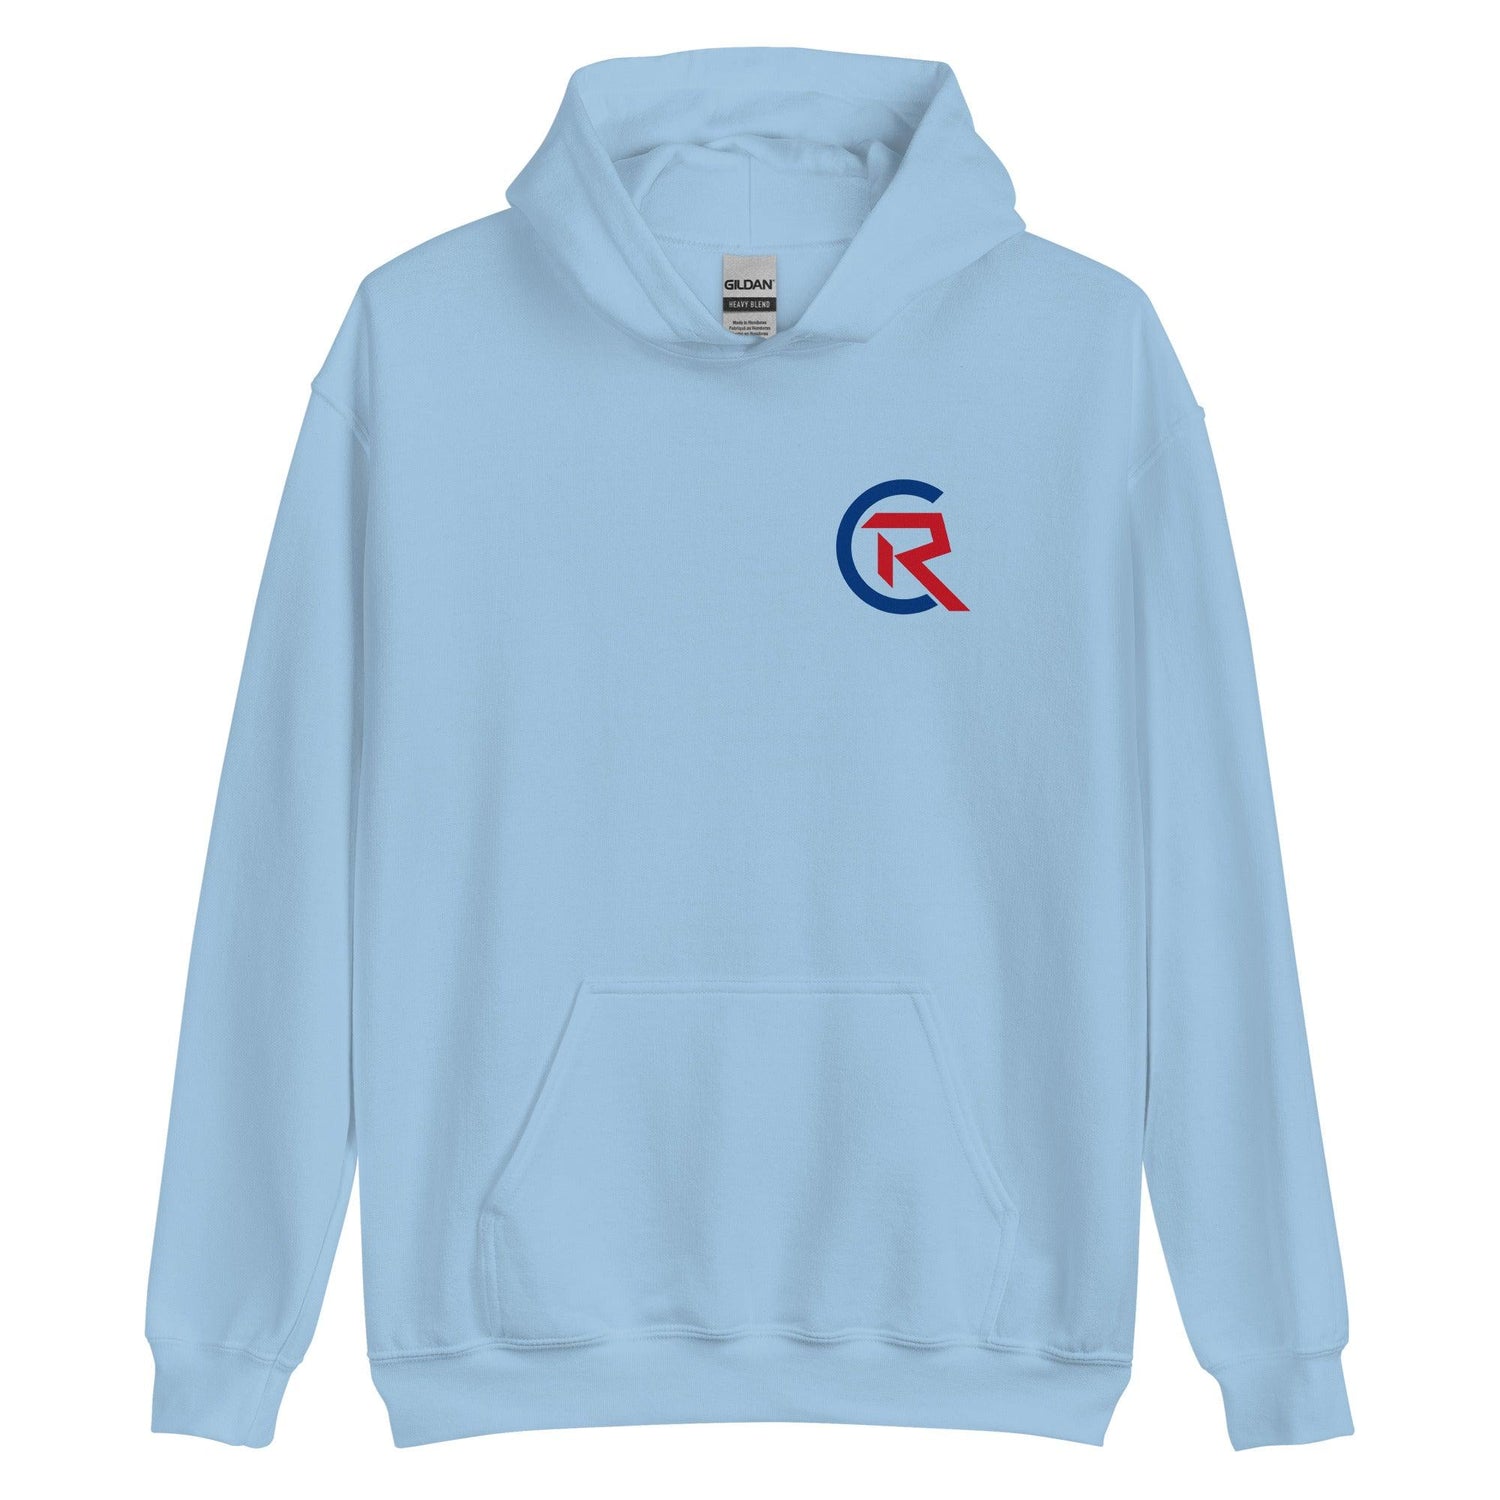 Cole Ragans “Signature” Hoodie - Fan Arch